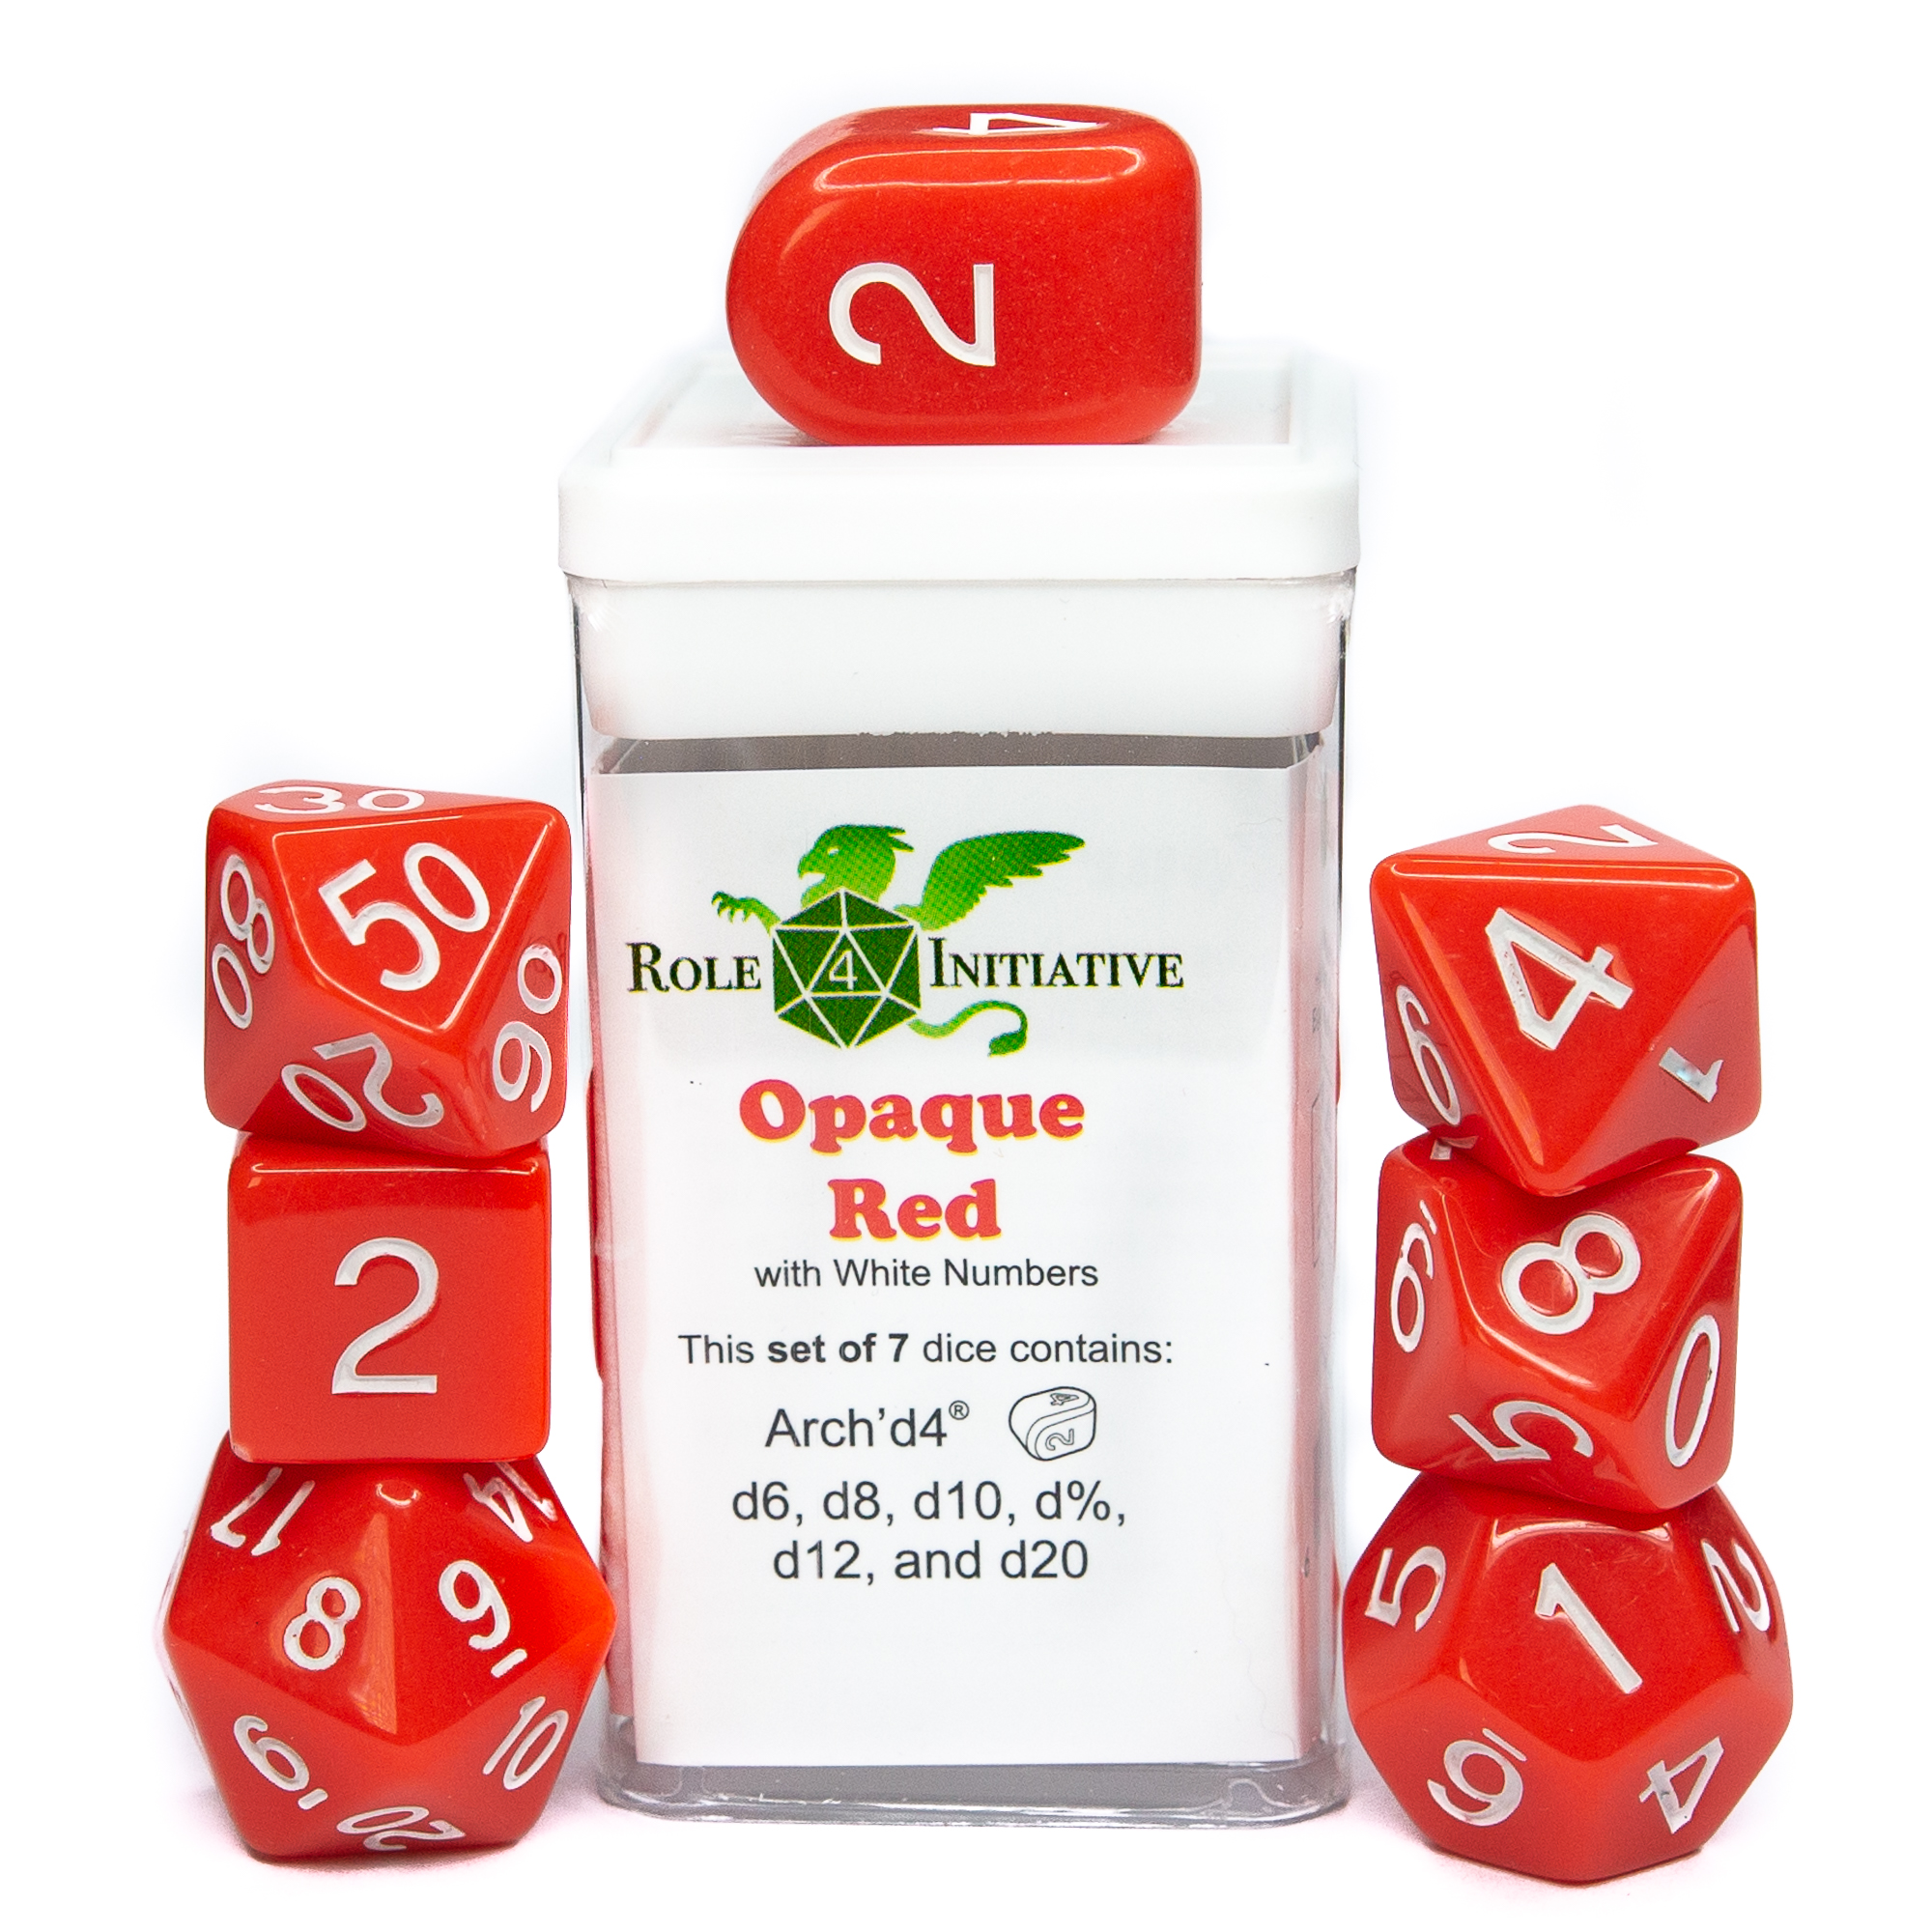 Role 4 Initiative - Opaque Red / White Numbers  7pc